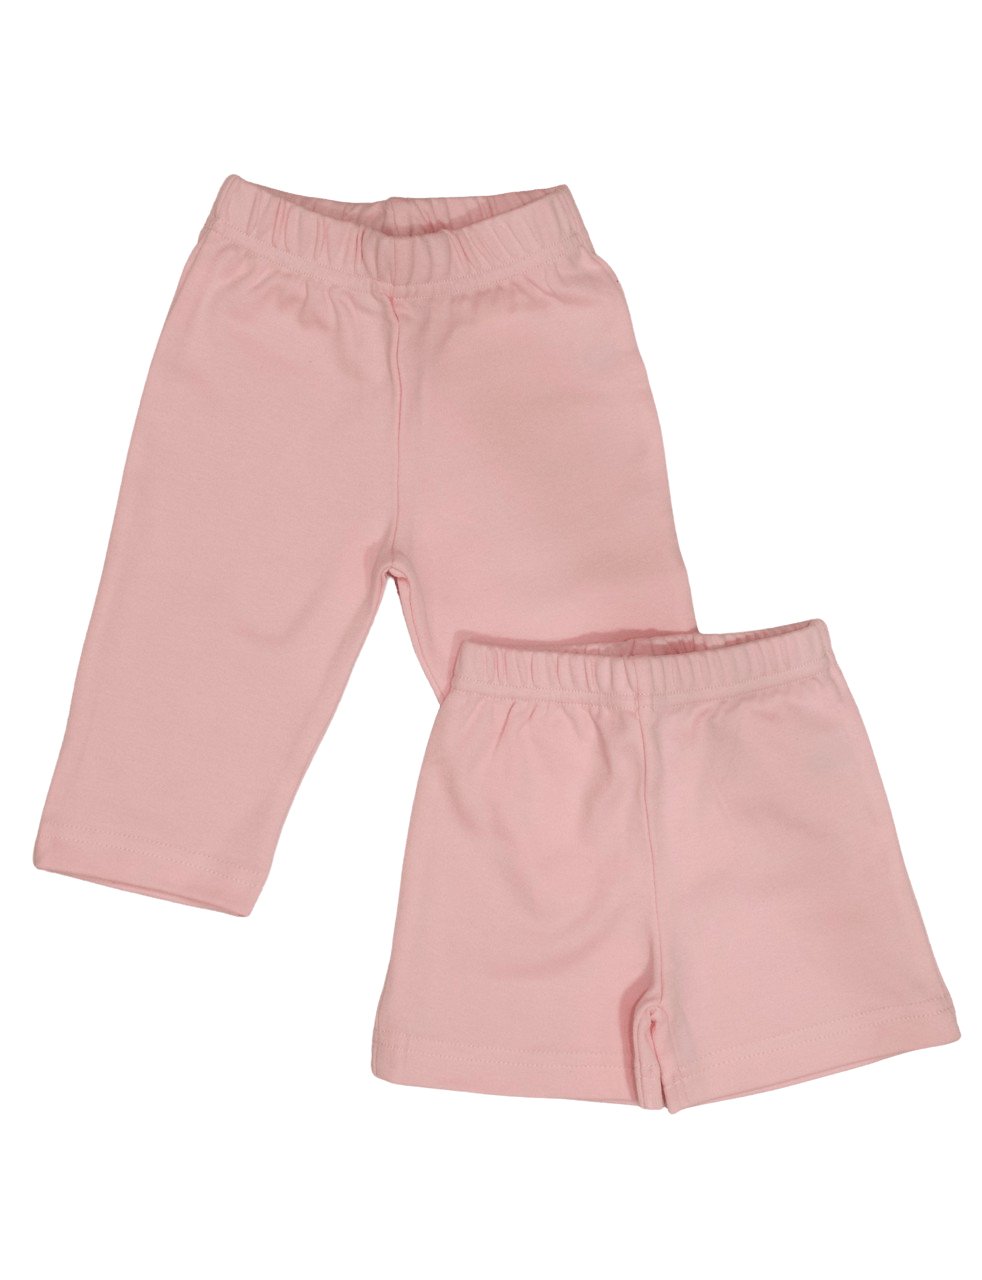 pull on pants & shorts- available in 4 colors by passion lilie